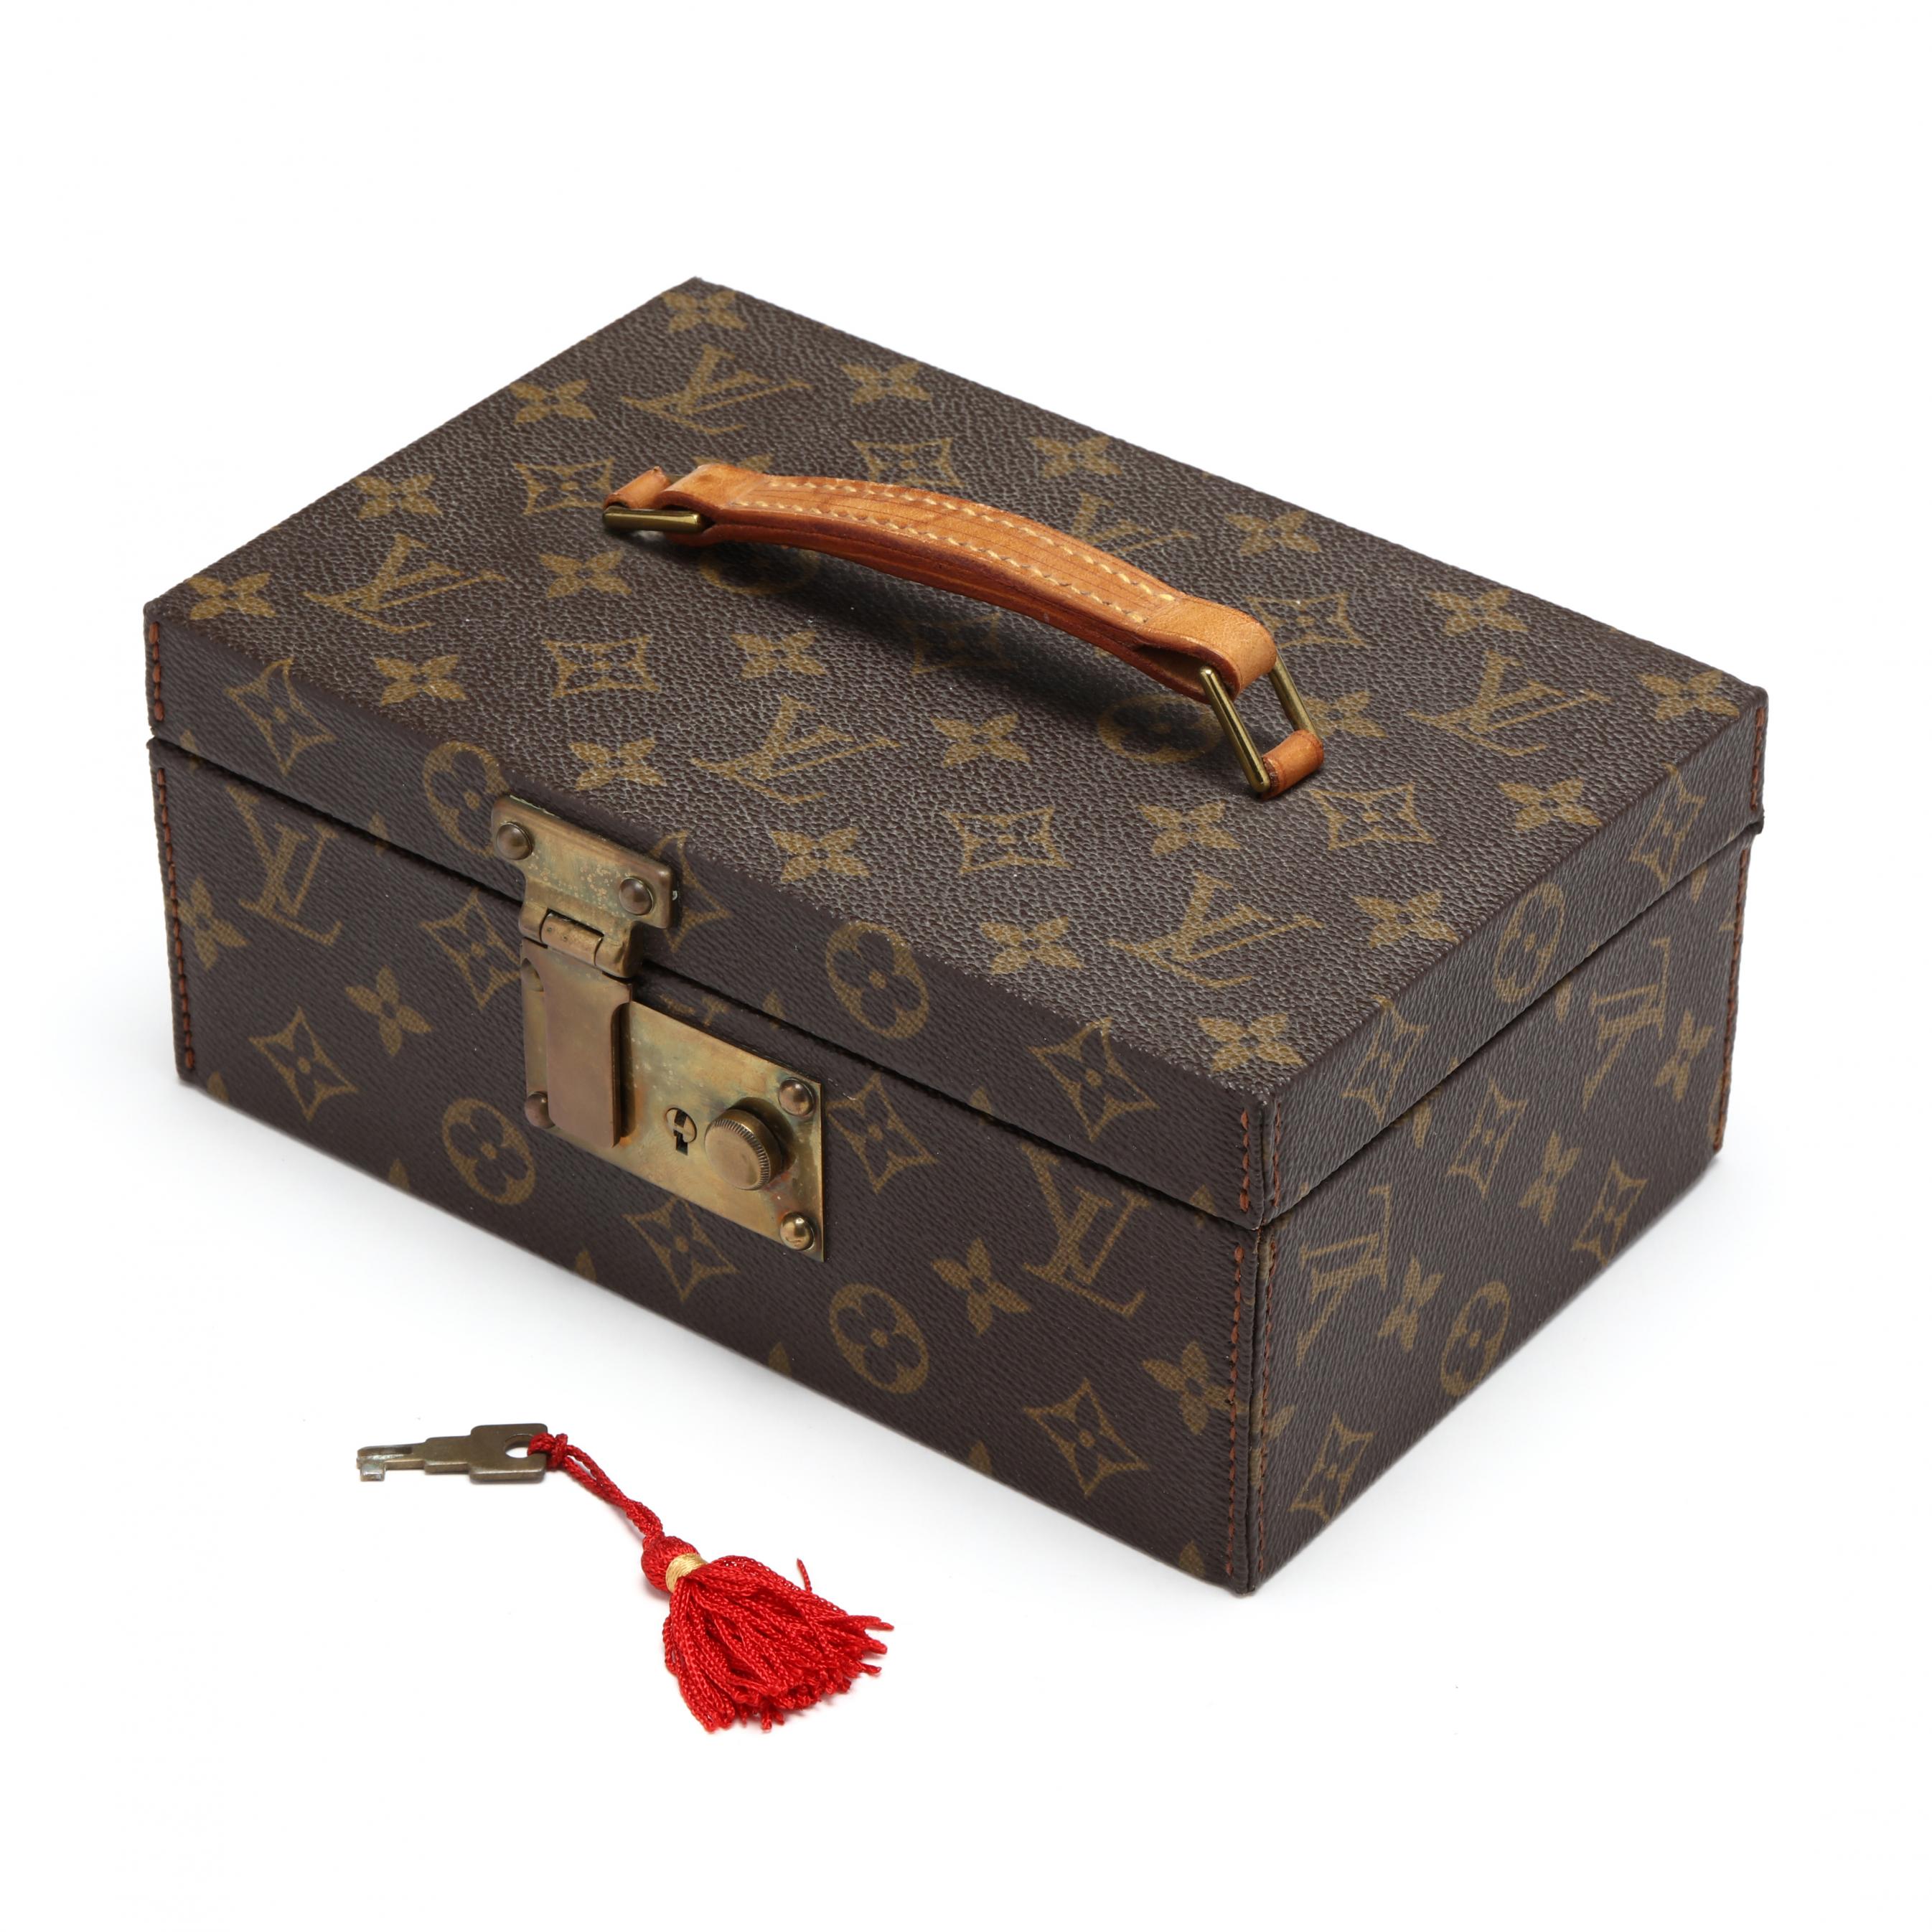 Monogram Boite A Tout Jewelry Hard Case, Louis Vuitton (Lot 136 - Upcoming:  The Important Spring Auction, Saturday, March 14thMar 14, 2020, 10:00am)